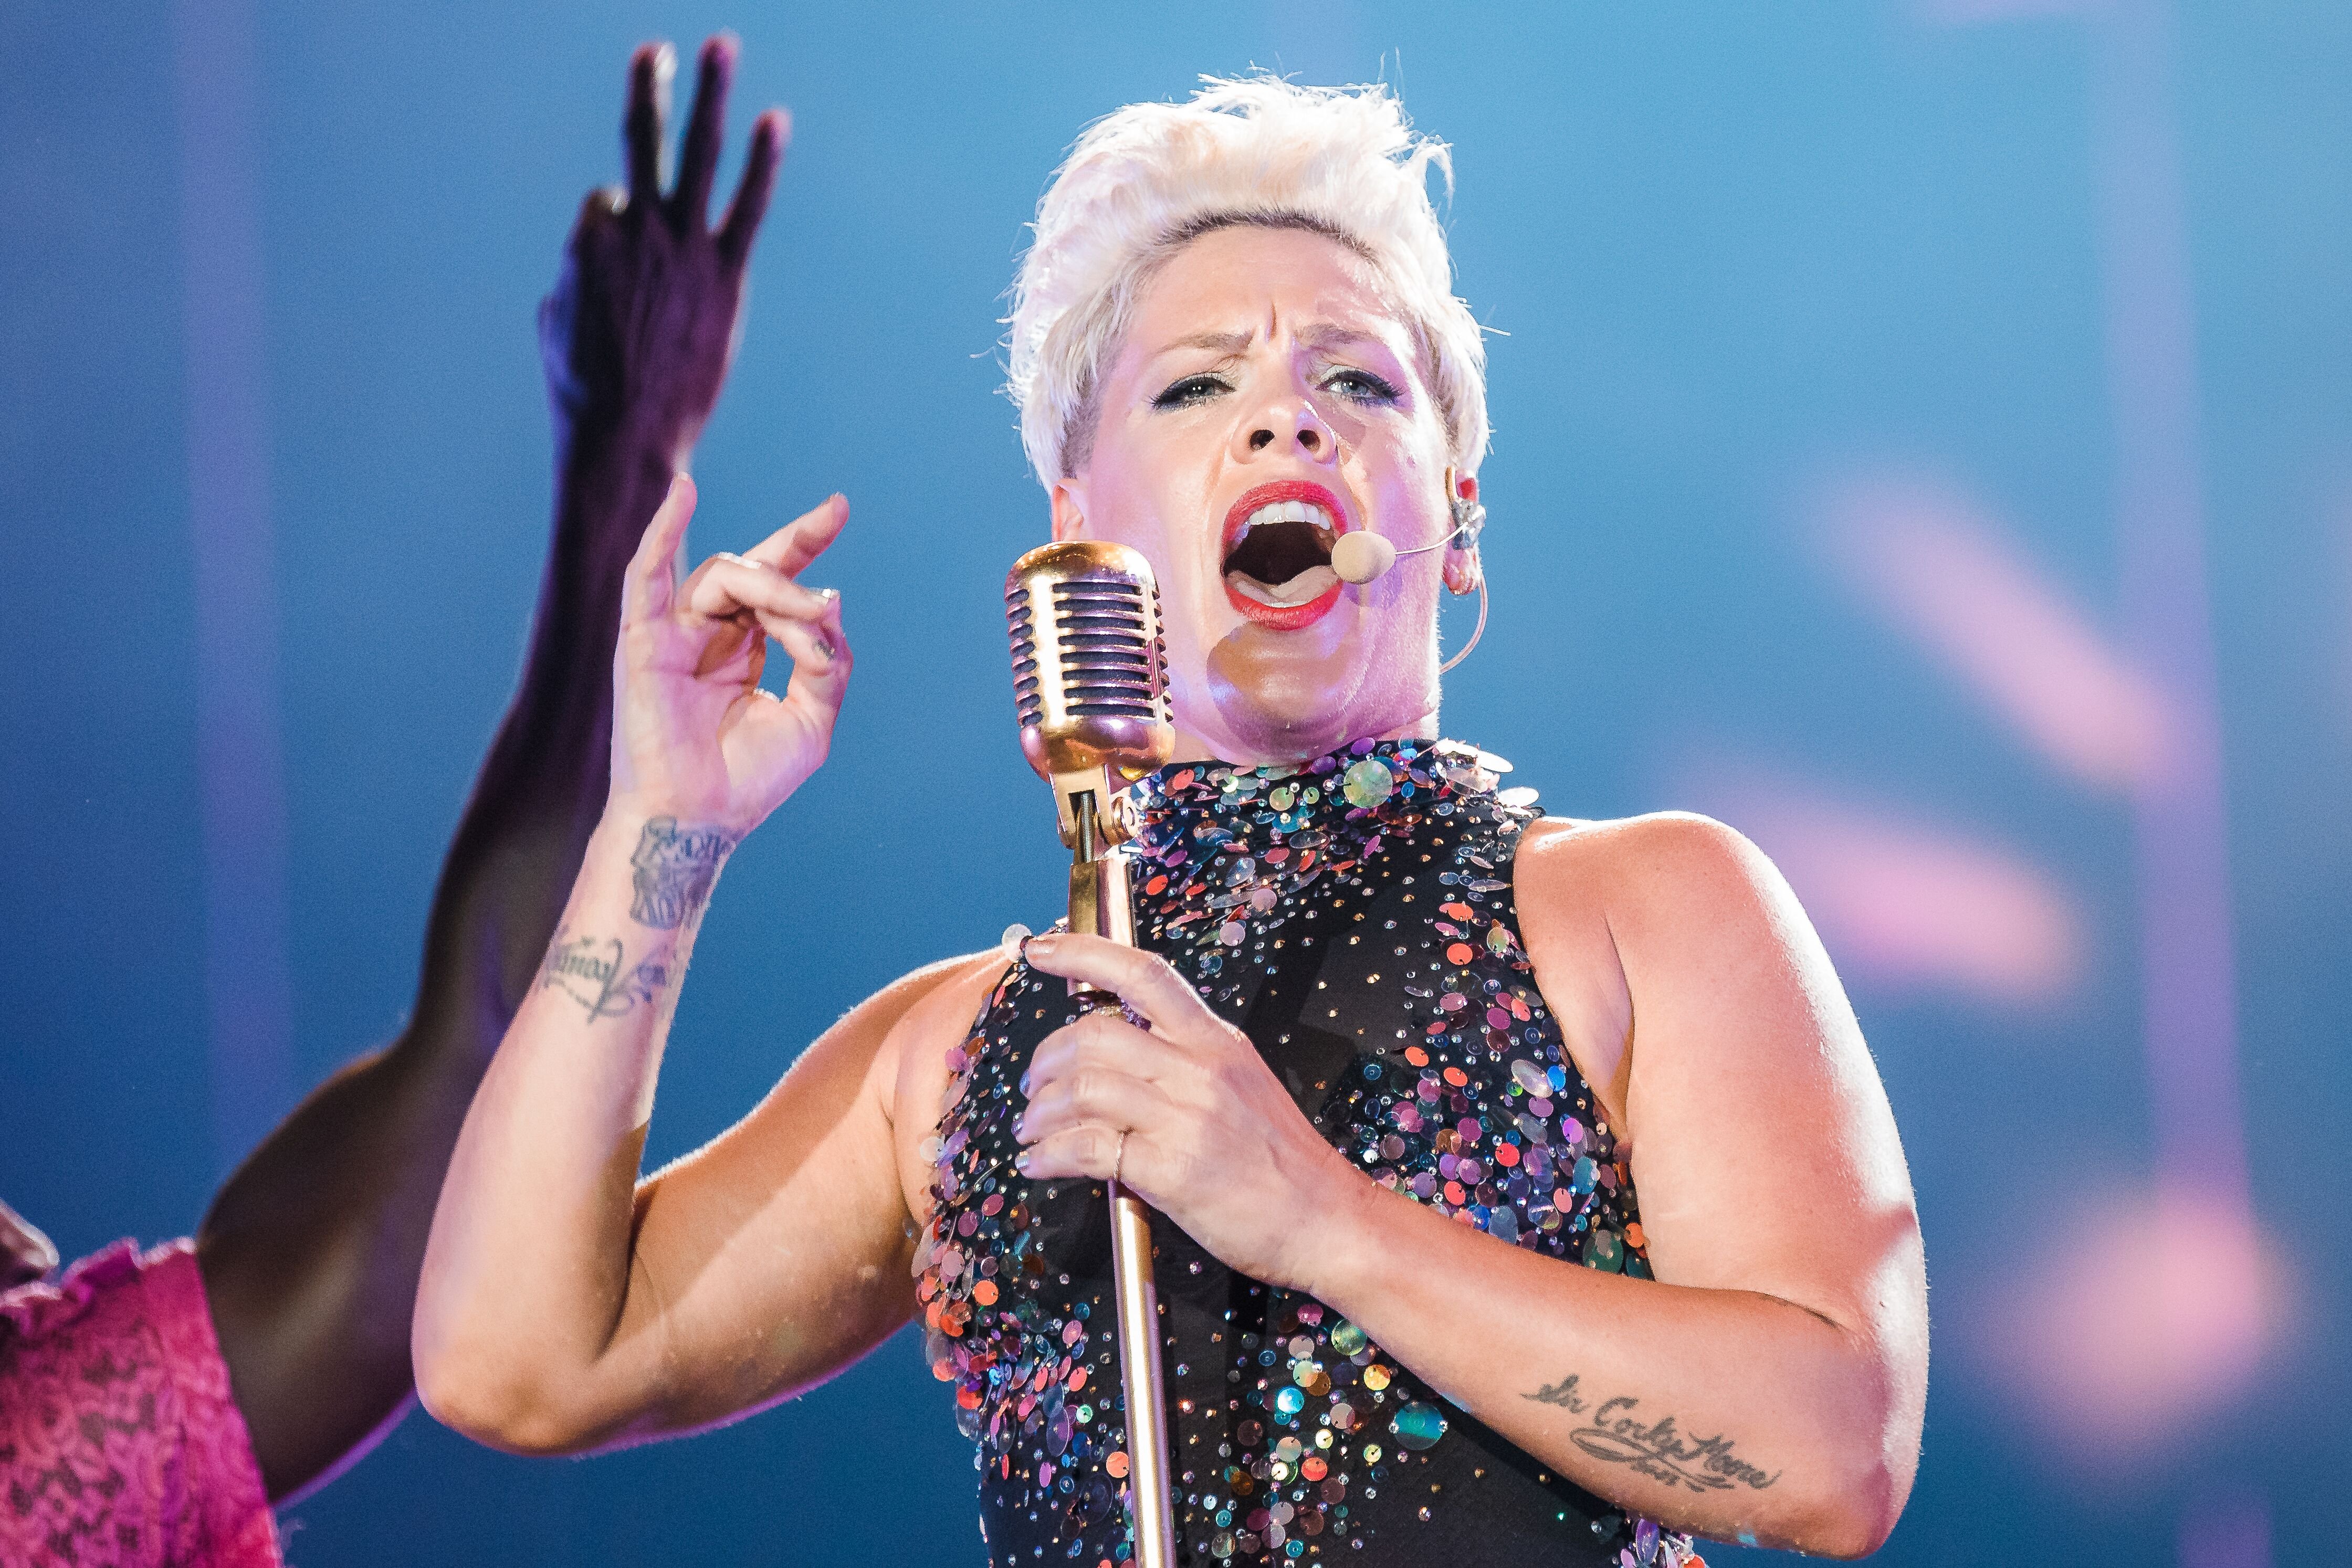 P!nk performs live on stage during day 6 of Rock In Rio Music Festival at Cidade do Rock on October 5, 2019 in Rio de Janeiro, Brazil. | Source: Getty Images